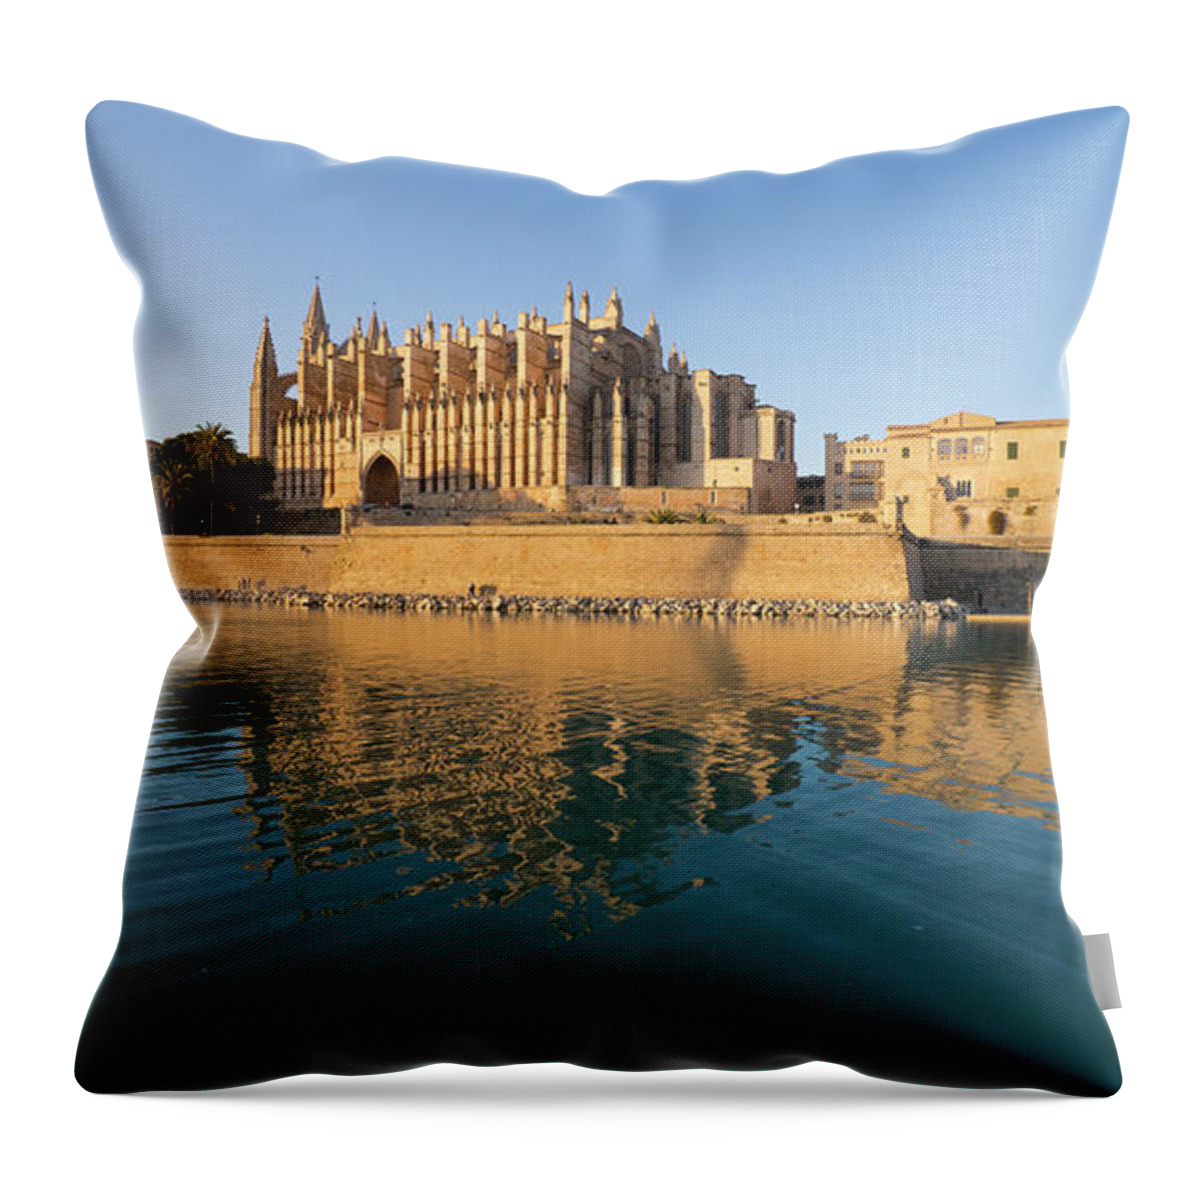 Clear Sky Throw Pillow featuring the photograph Palma Cathedral And Historical City by Travelpix Ltd